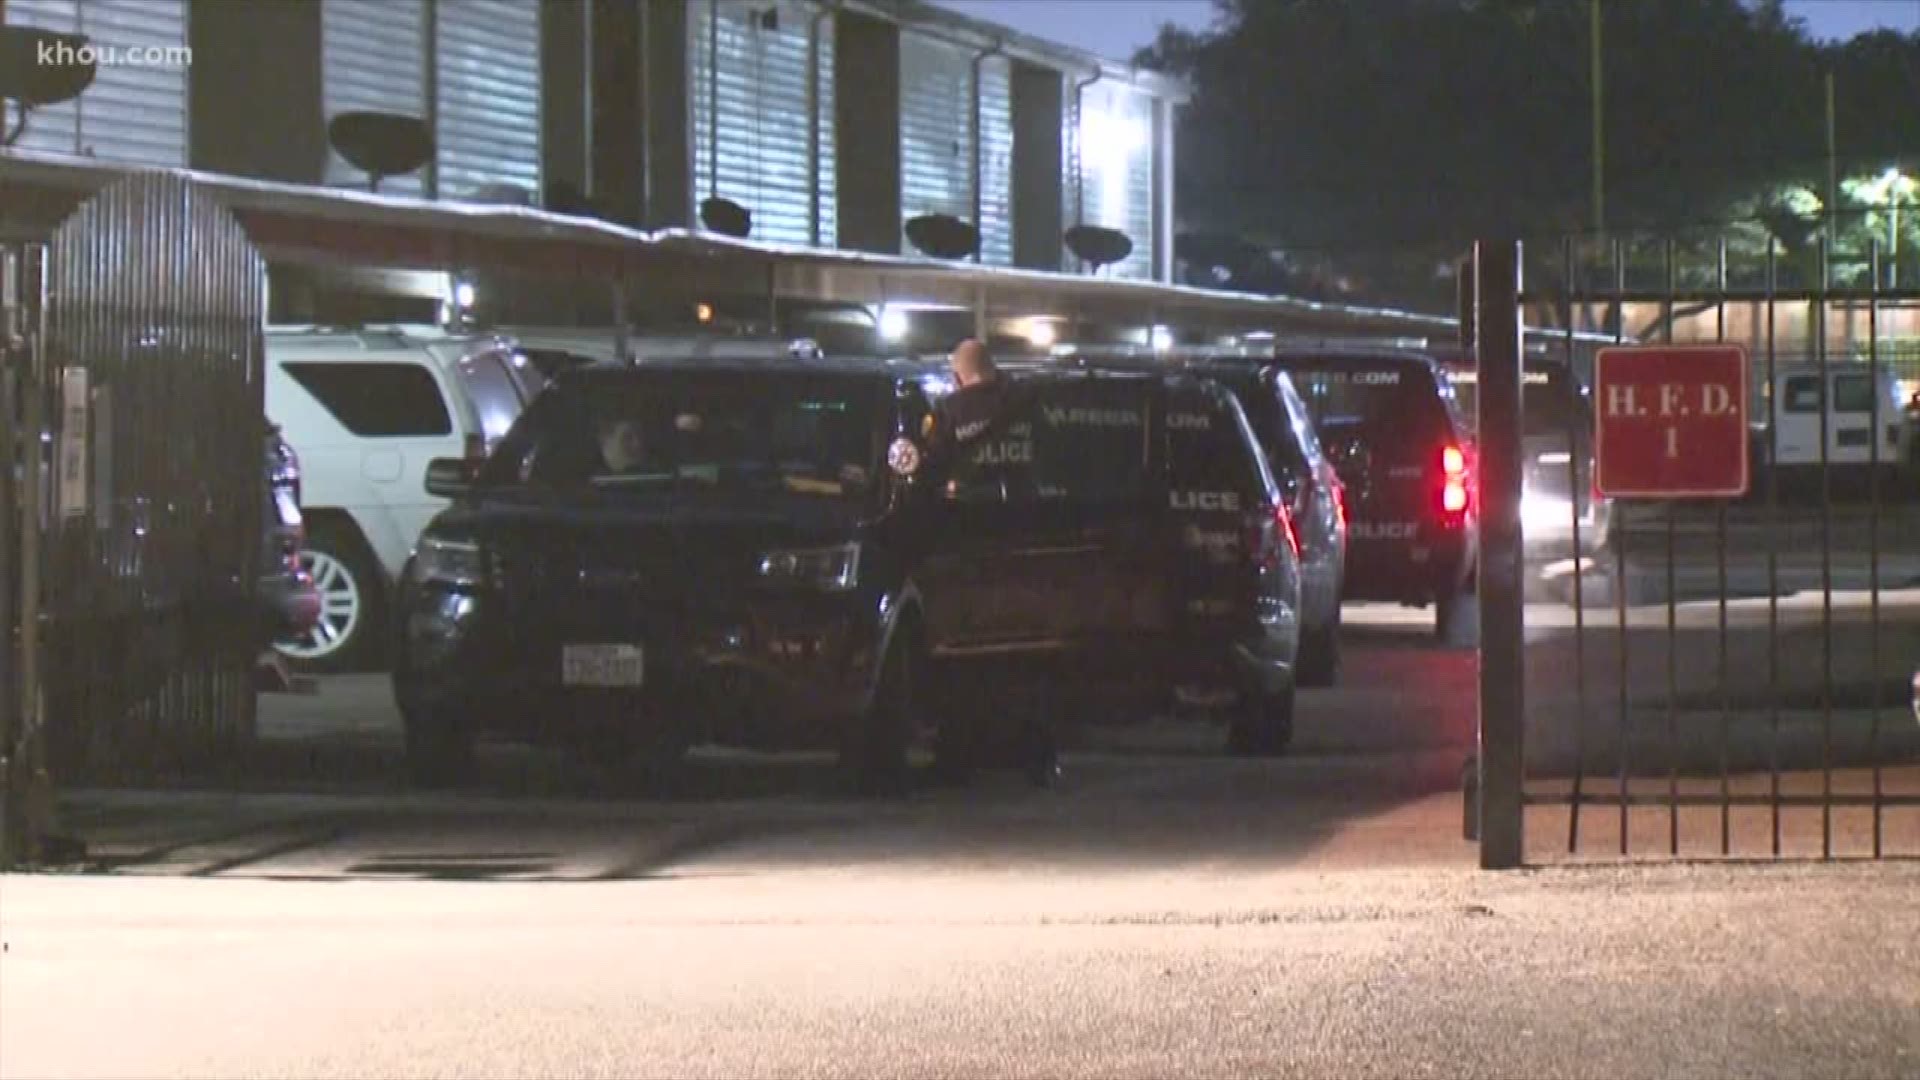 UPDATE: A man who had been barricaded inside a southwest Houston apartment gave himself up shortly after this report.